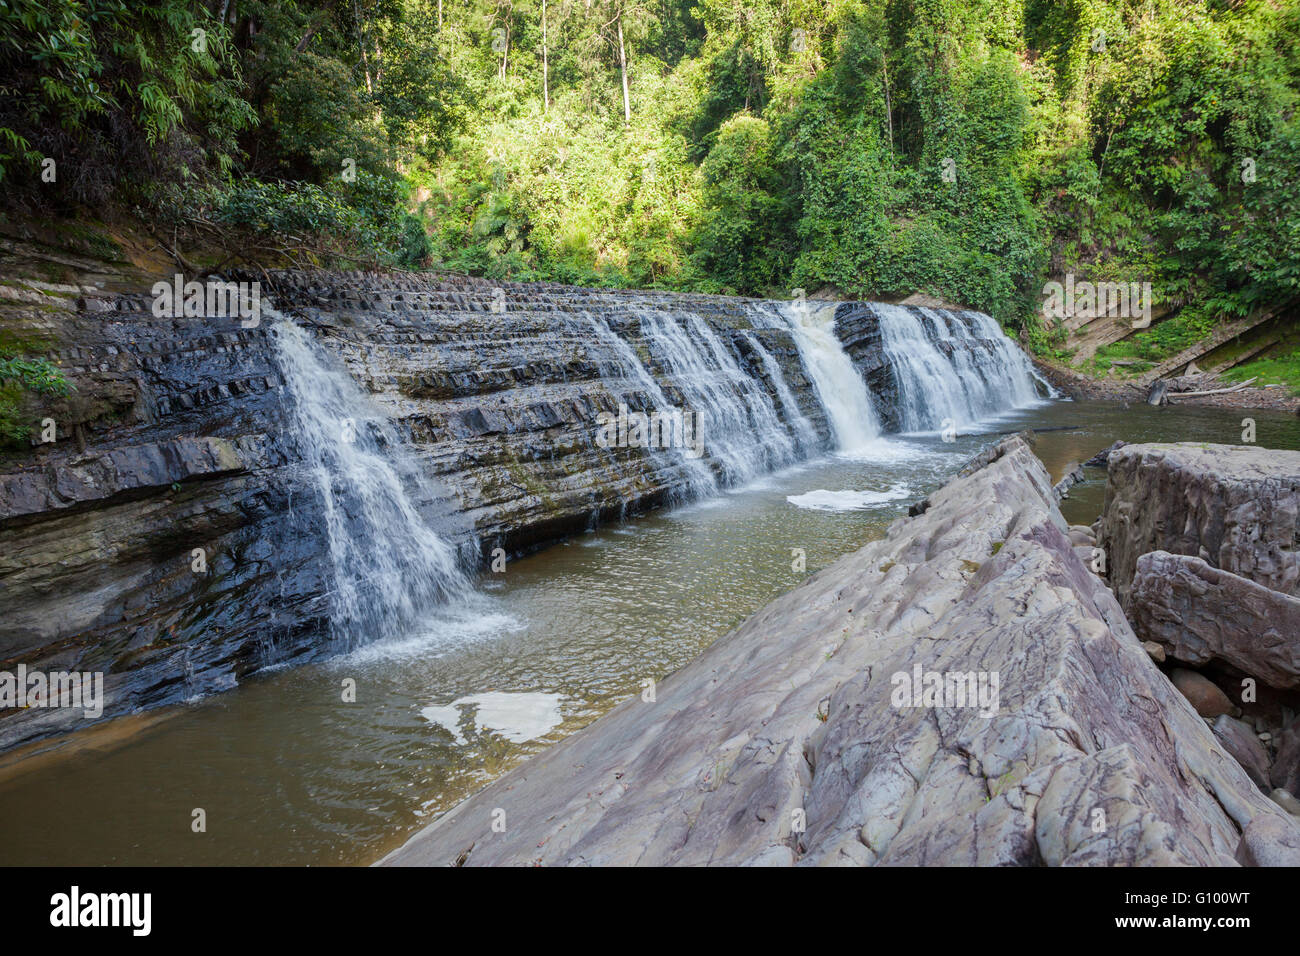 View of Imbak Falls in Imbak Canyon Conservation area, in remote rainforest of Sabah, Borneo Malaysia. Stock Photo